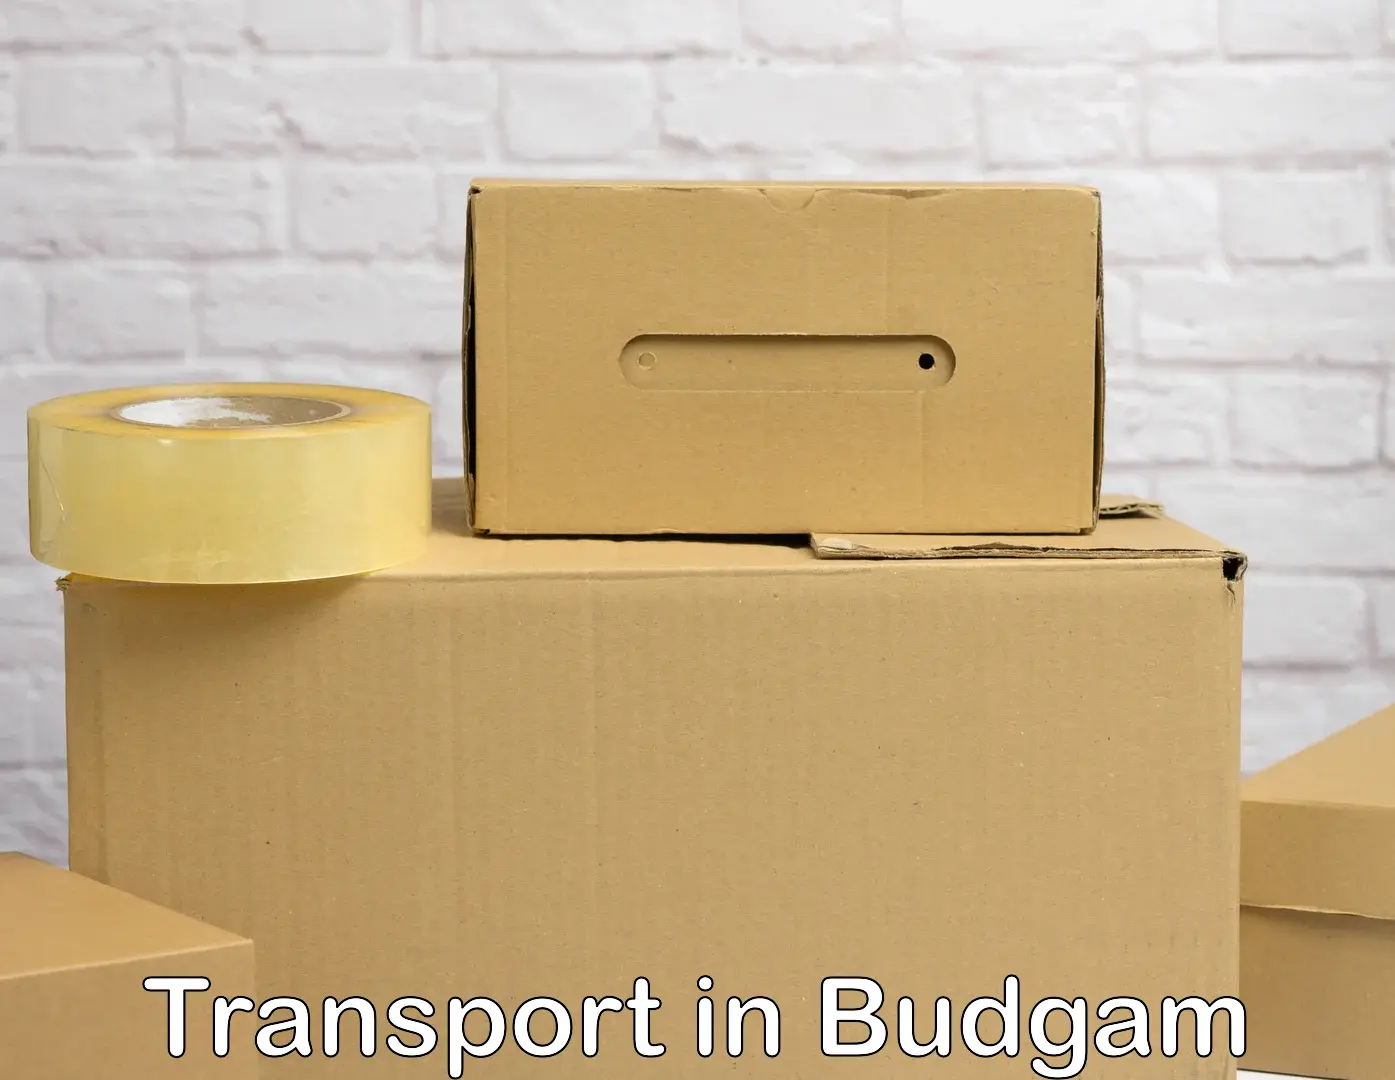 Express transport services in Budgam